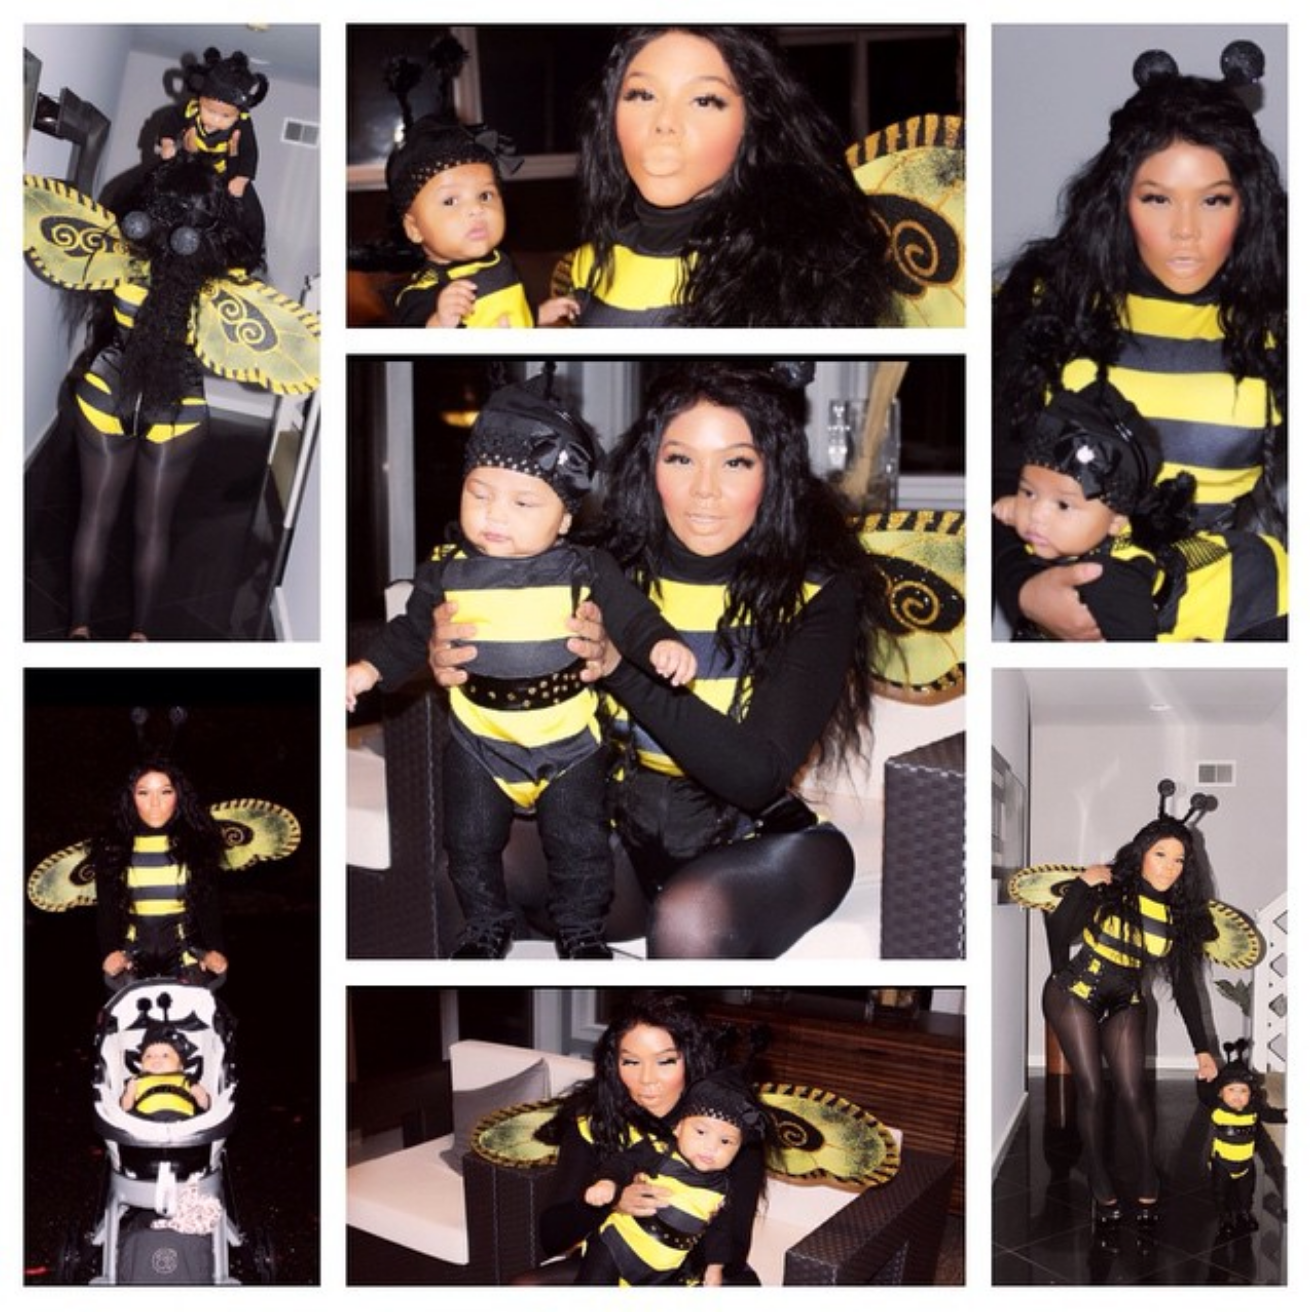 Lil Kim's Daughter Royal Reign Is The Cutest Little Tot On The 'Gram
